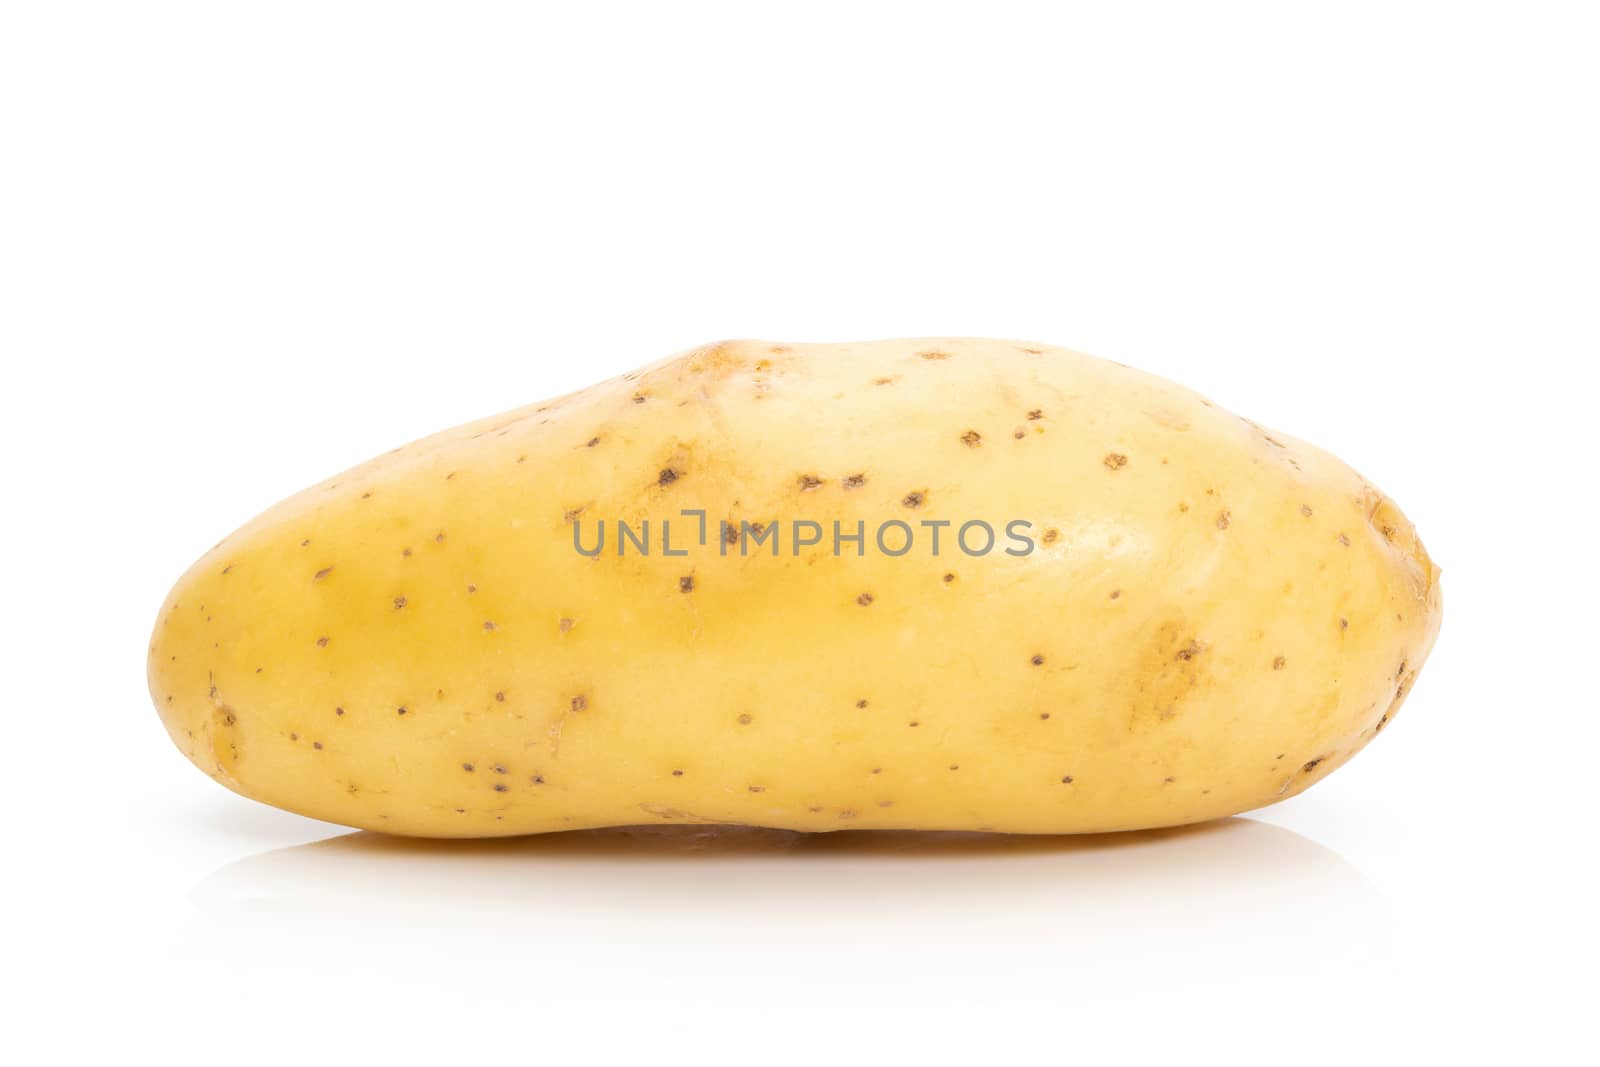 Potato raw on a white background by sompongtom